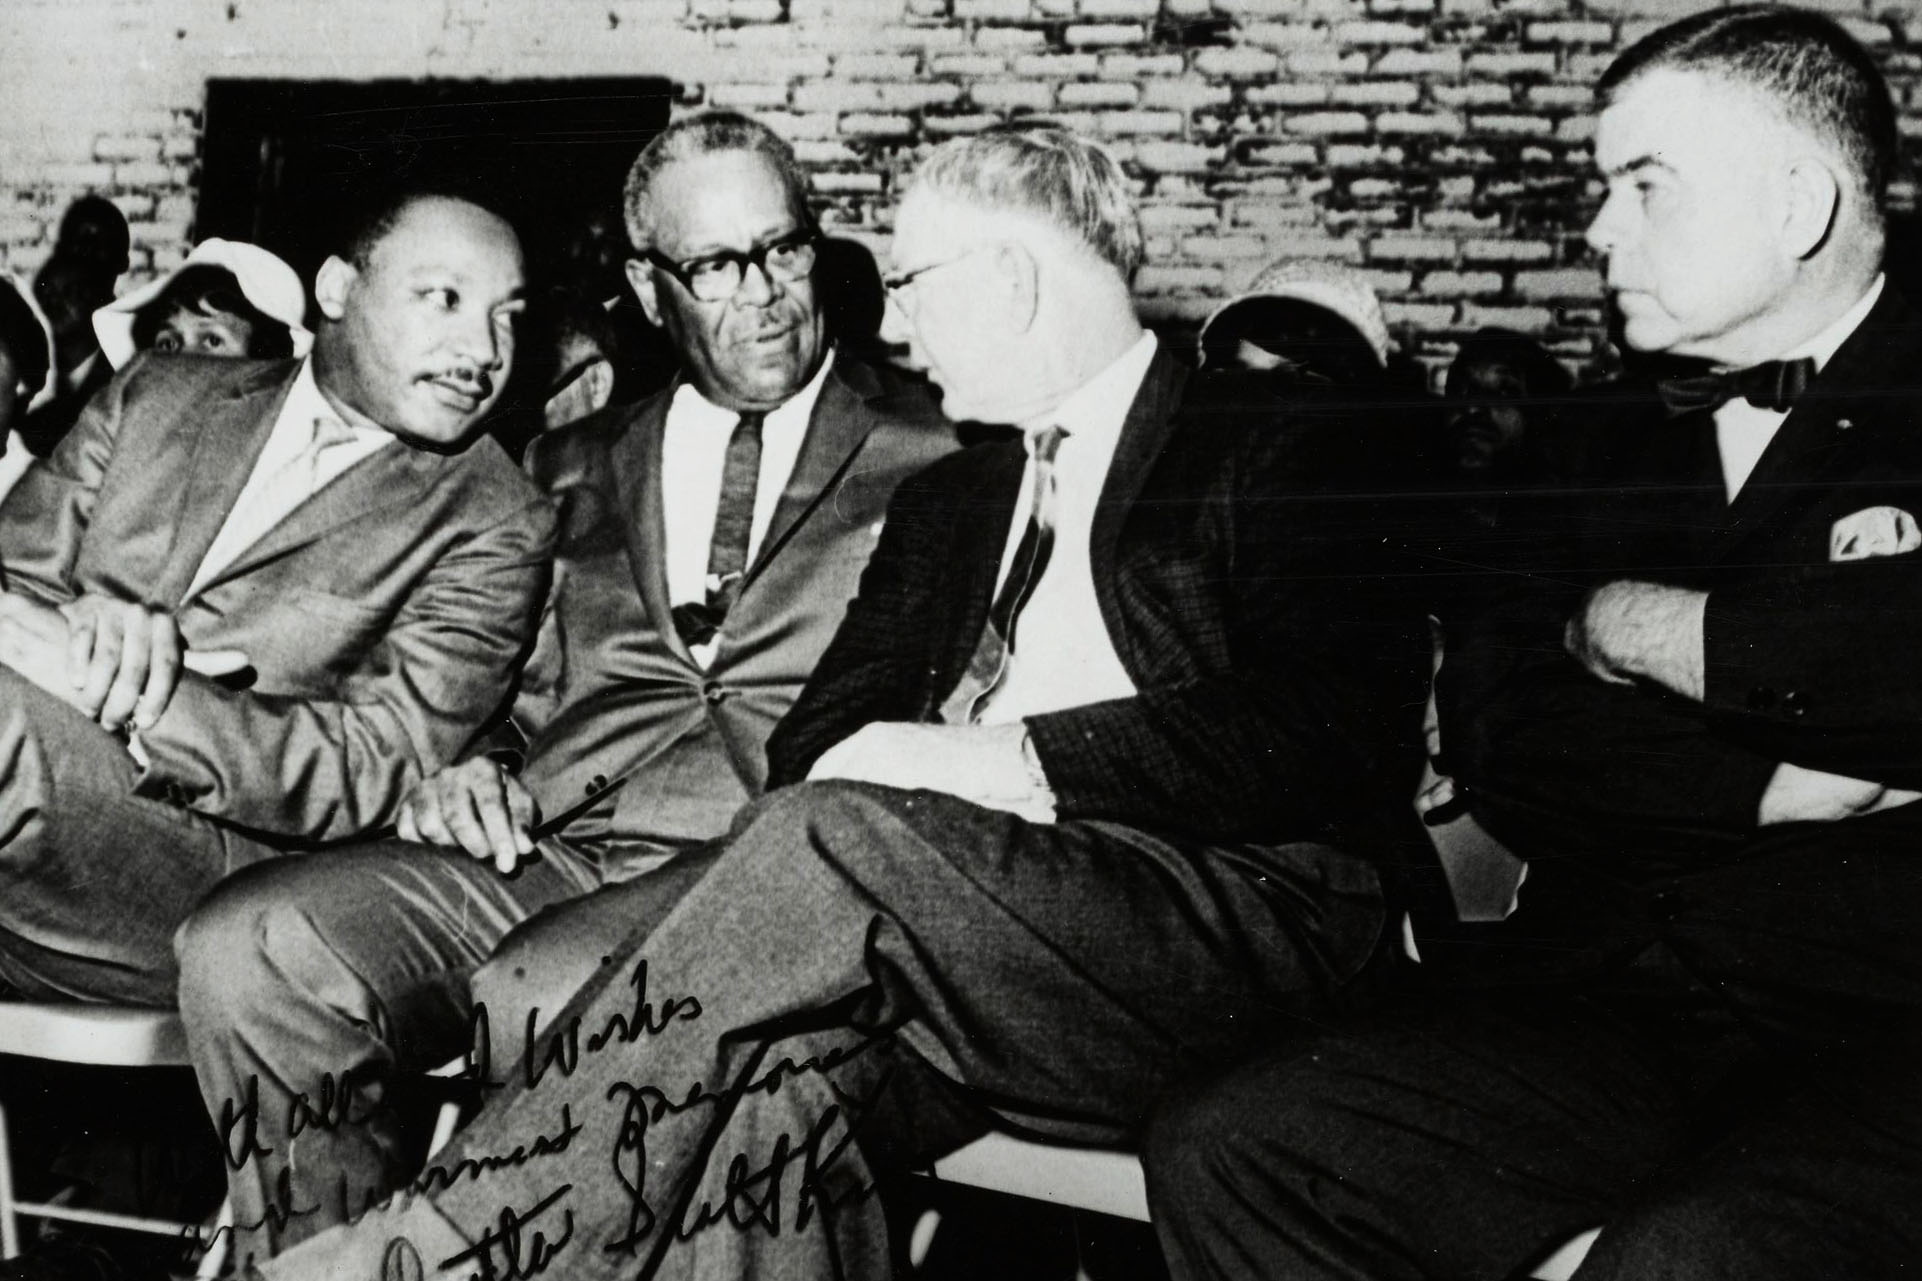 Walter Ridley, second from left,  speaking with Martin Luther King Jr, left, and two other gentlemen right